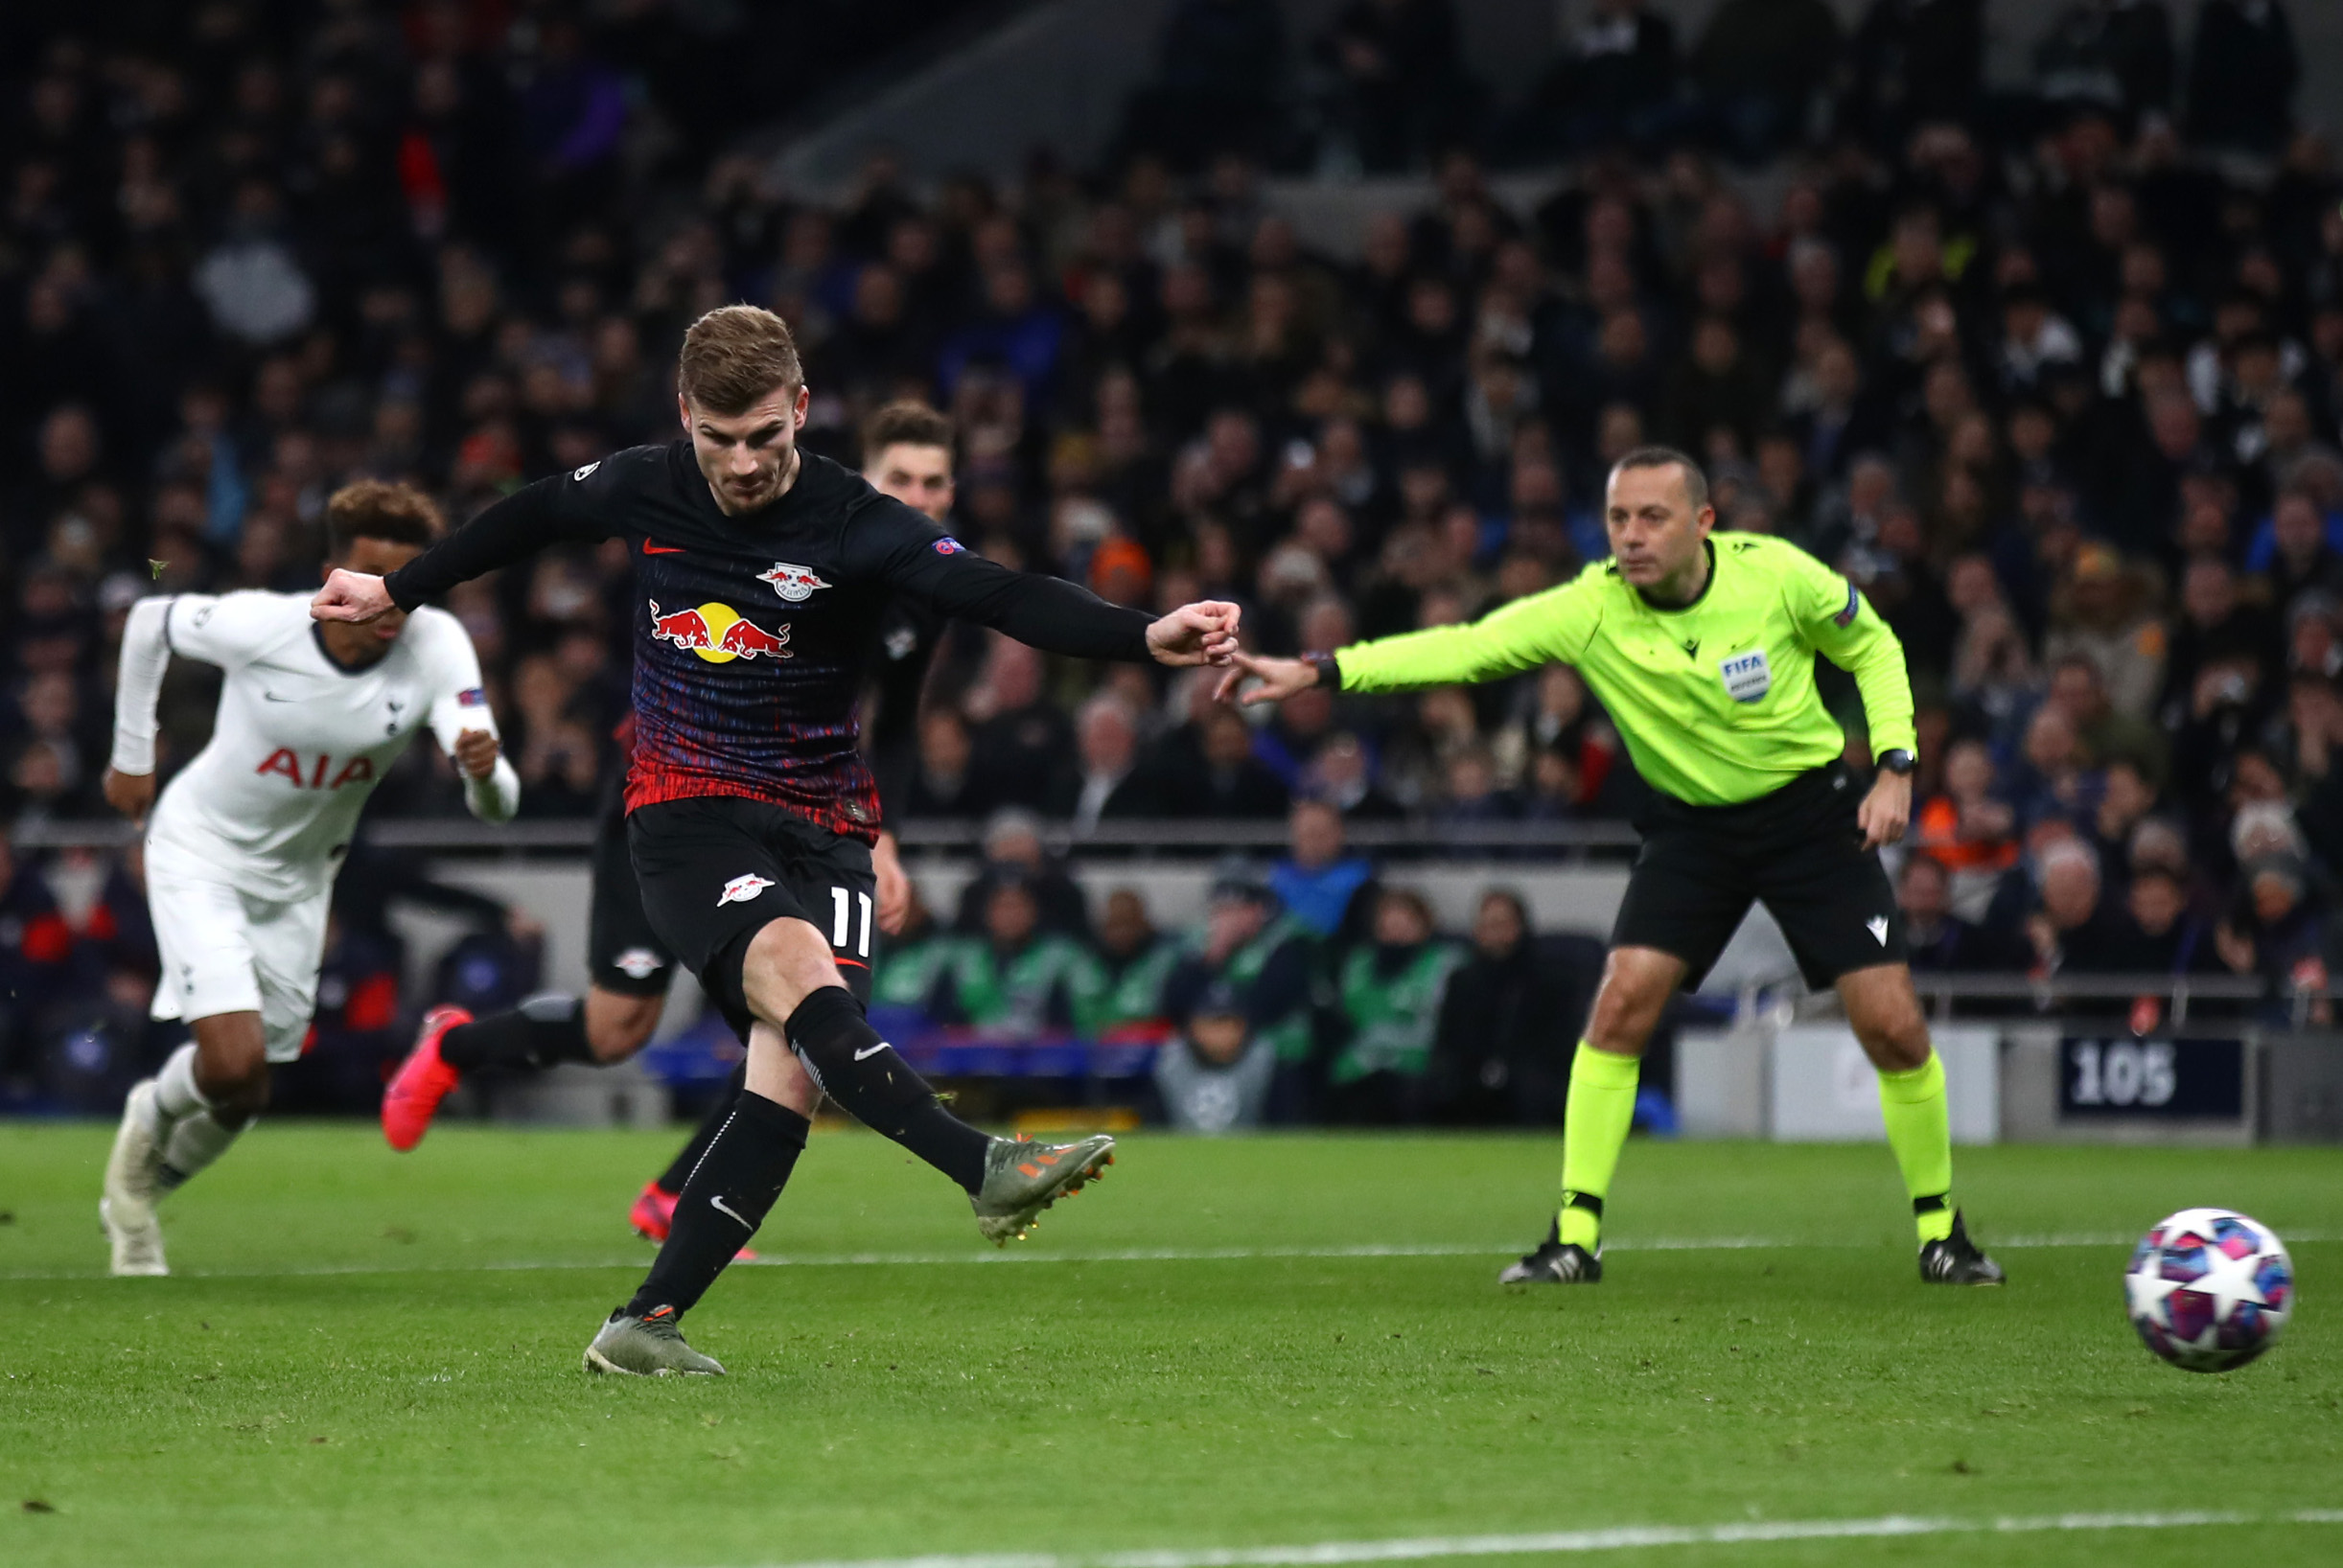 LONDON, ENGLAND - FEBRUARY 19: Timo Werner of RB Leipzig scores his team's first goal from the penalty spot during the UEFA Champions League round of 16 first leg match between Tottenham Hotspur and RB Leipzig at Tottenham Hotspur Stadium on February 19, 2020 in London, United Kingdom. (Photo by Julian Finney/Getty Images)